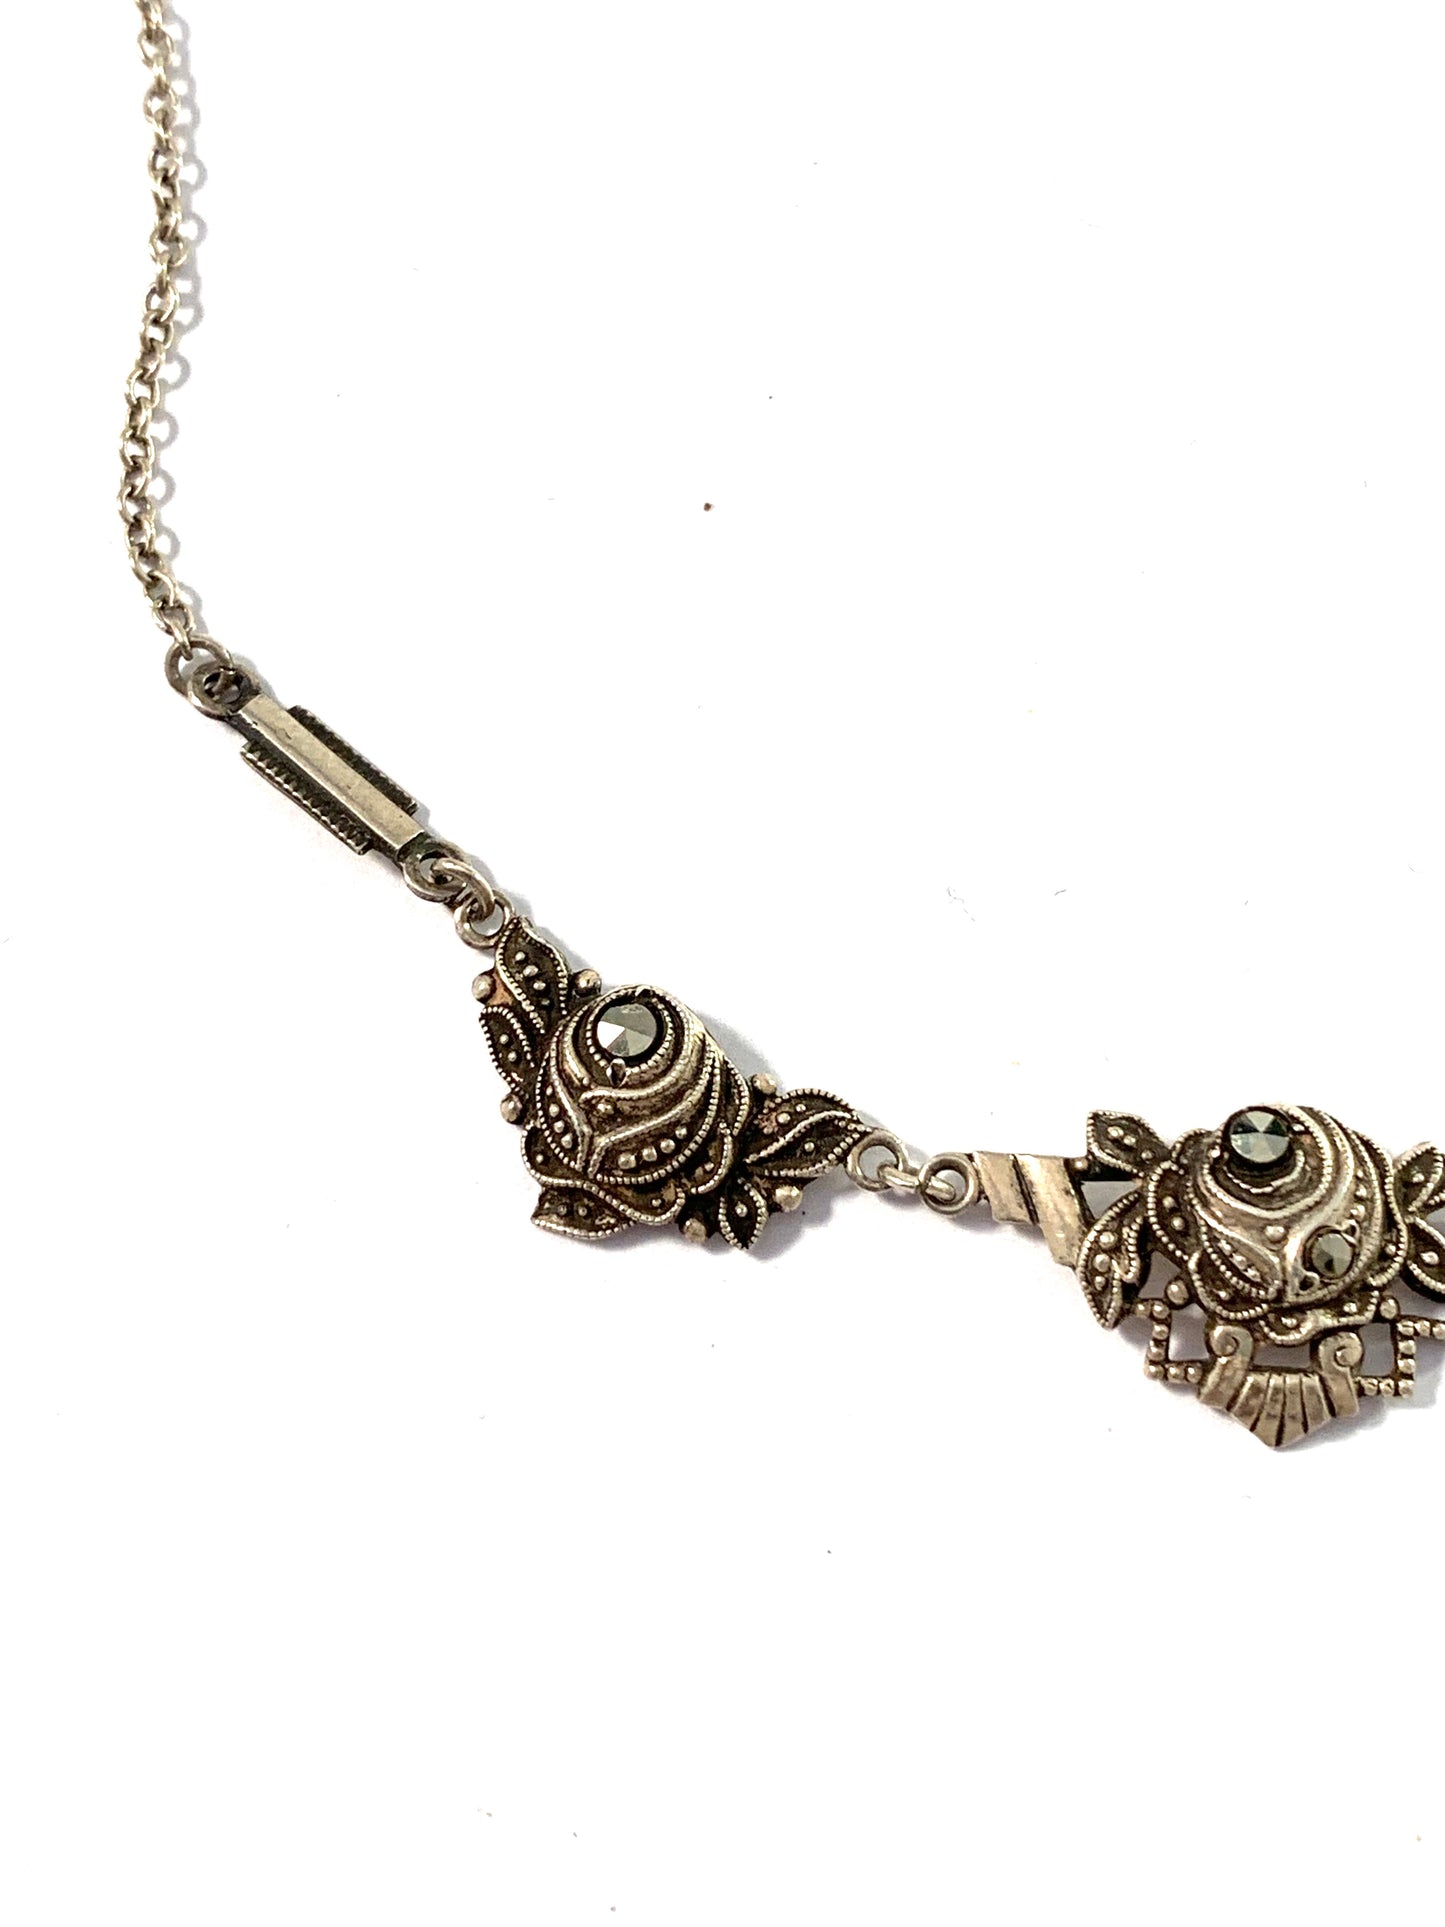 Hugo Grun, Sweden early 1900s Solid Silver Marcasite Flower Necklace.